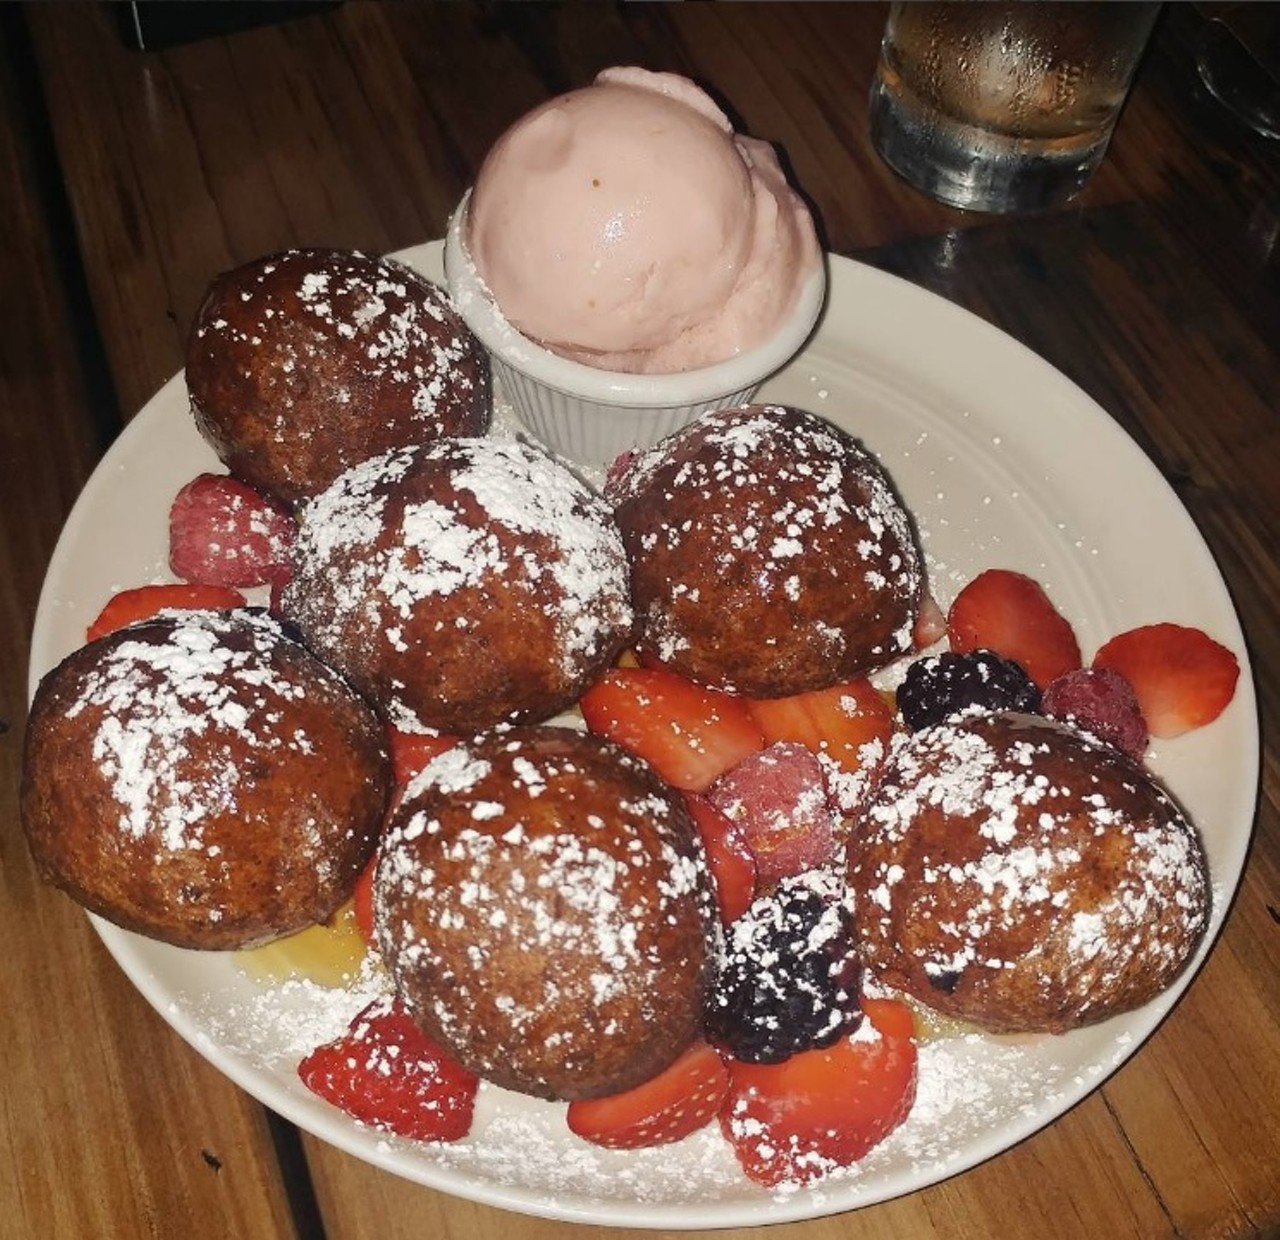 Must try: Save room for dessert and try the ricotta donuts.
Photo courtesy of Instagram / ciarasantangelo.